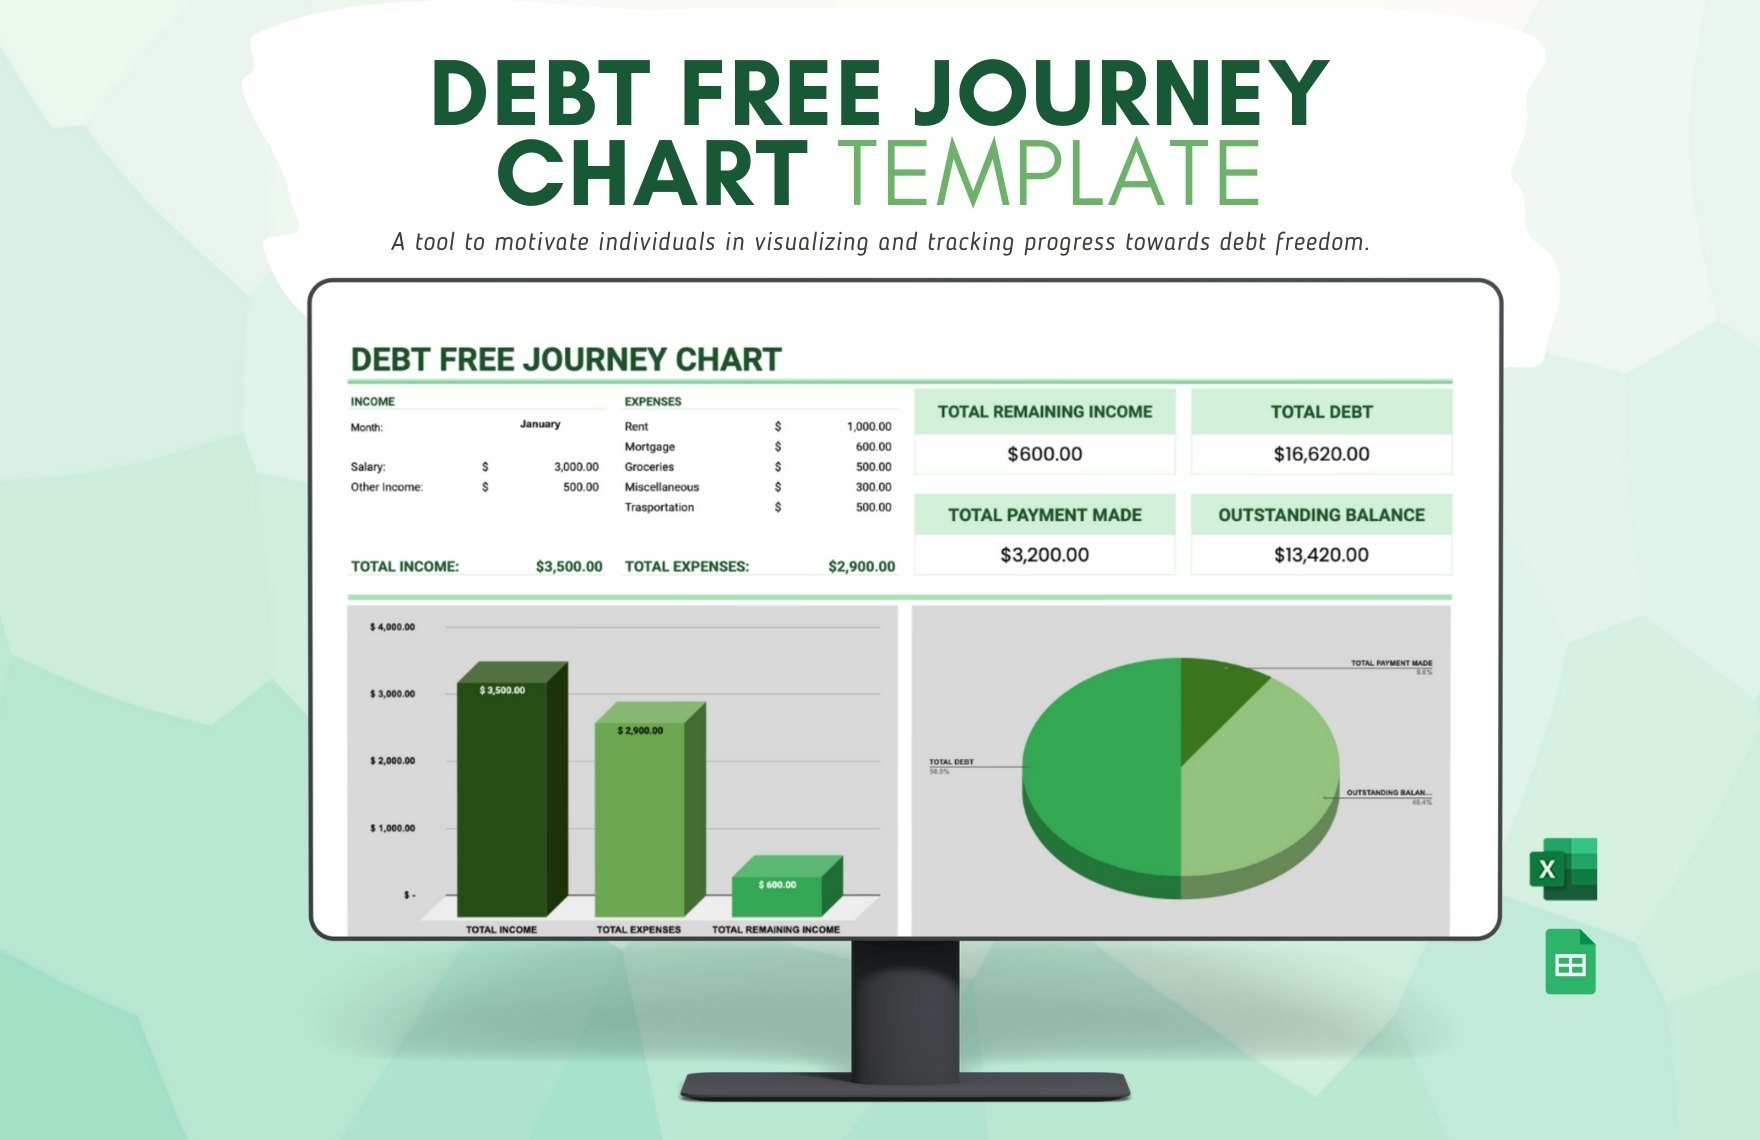 Debt Free Journey Chart Template in Excel, Google Sheets